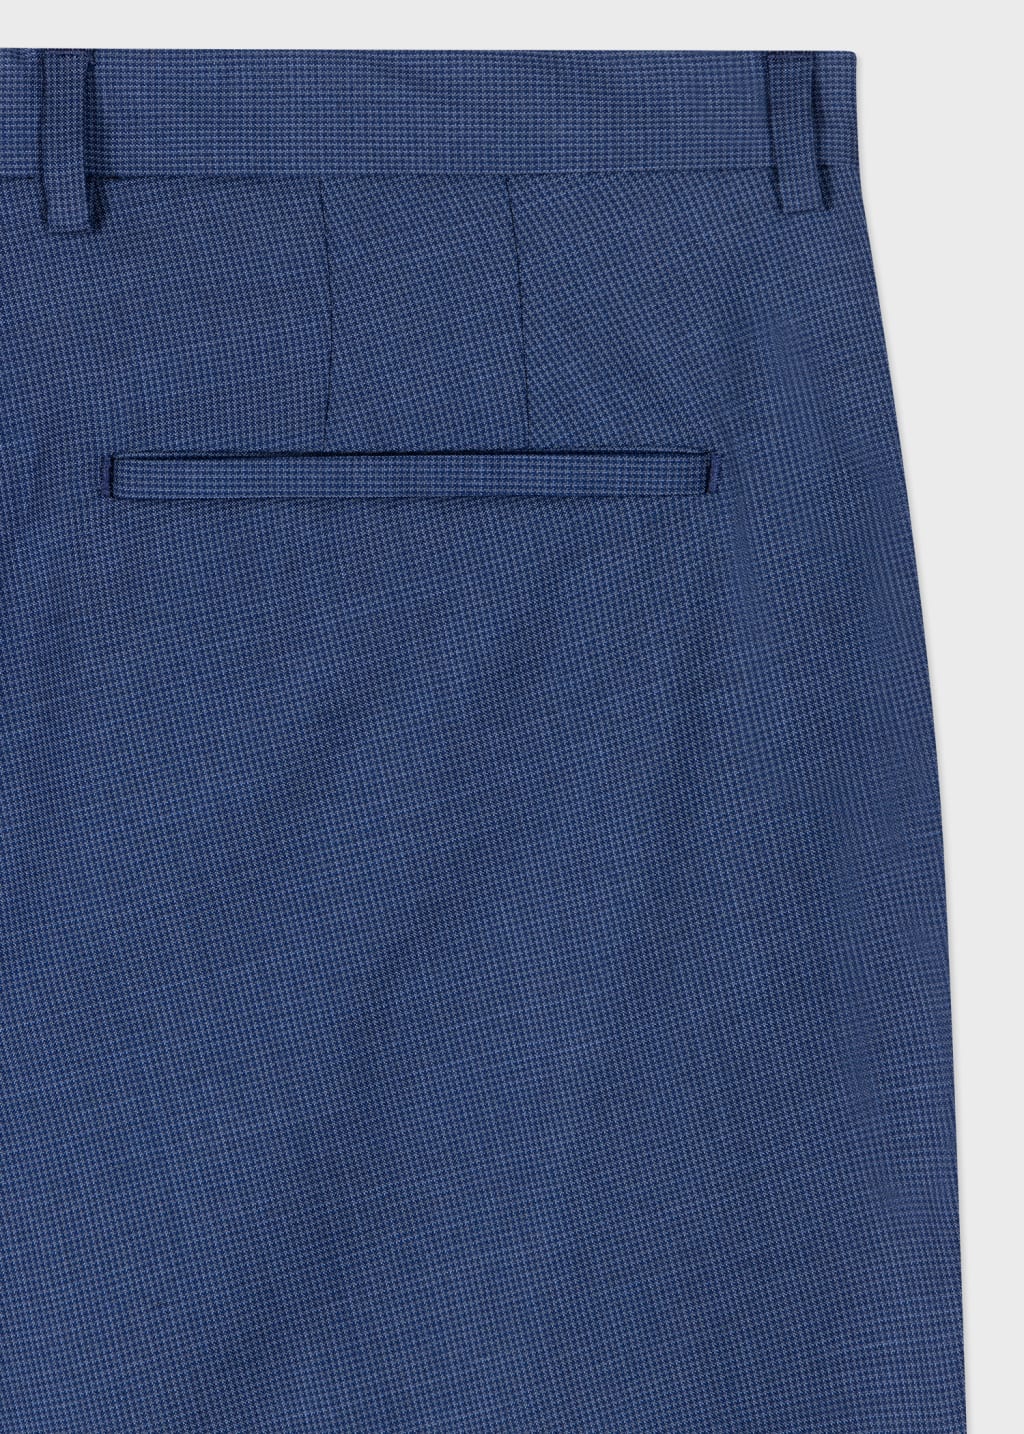 Detail View - The Kensington - Slim-Fit Mid Blue Micro Check Wool Suit Paul Smith